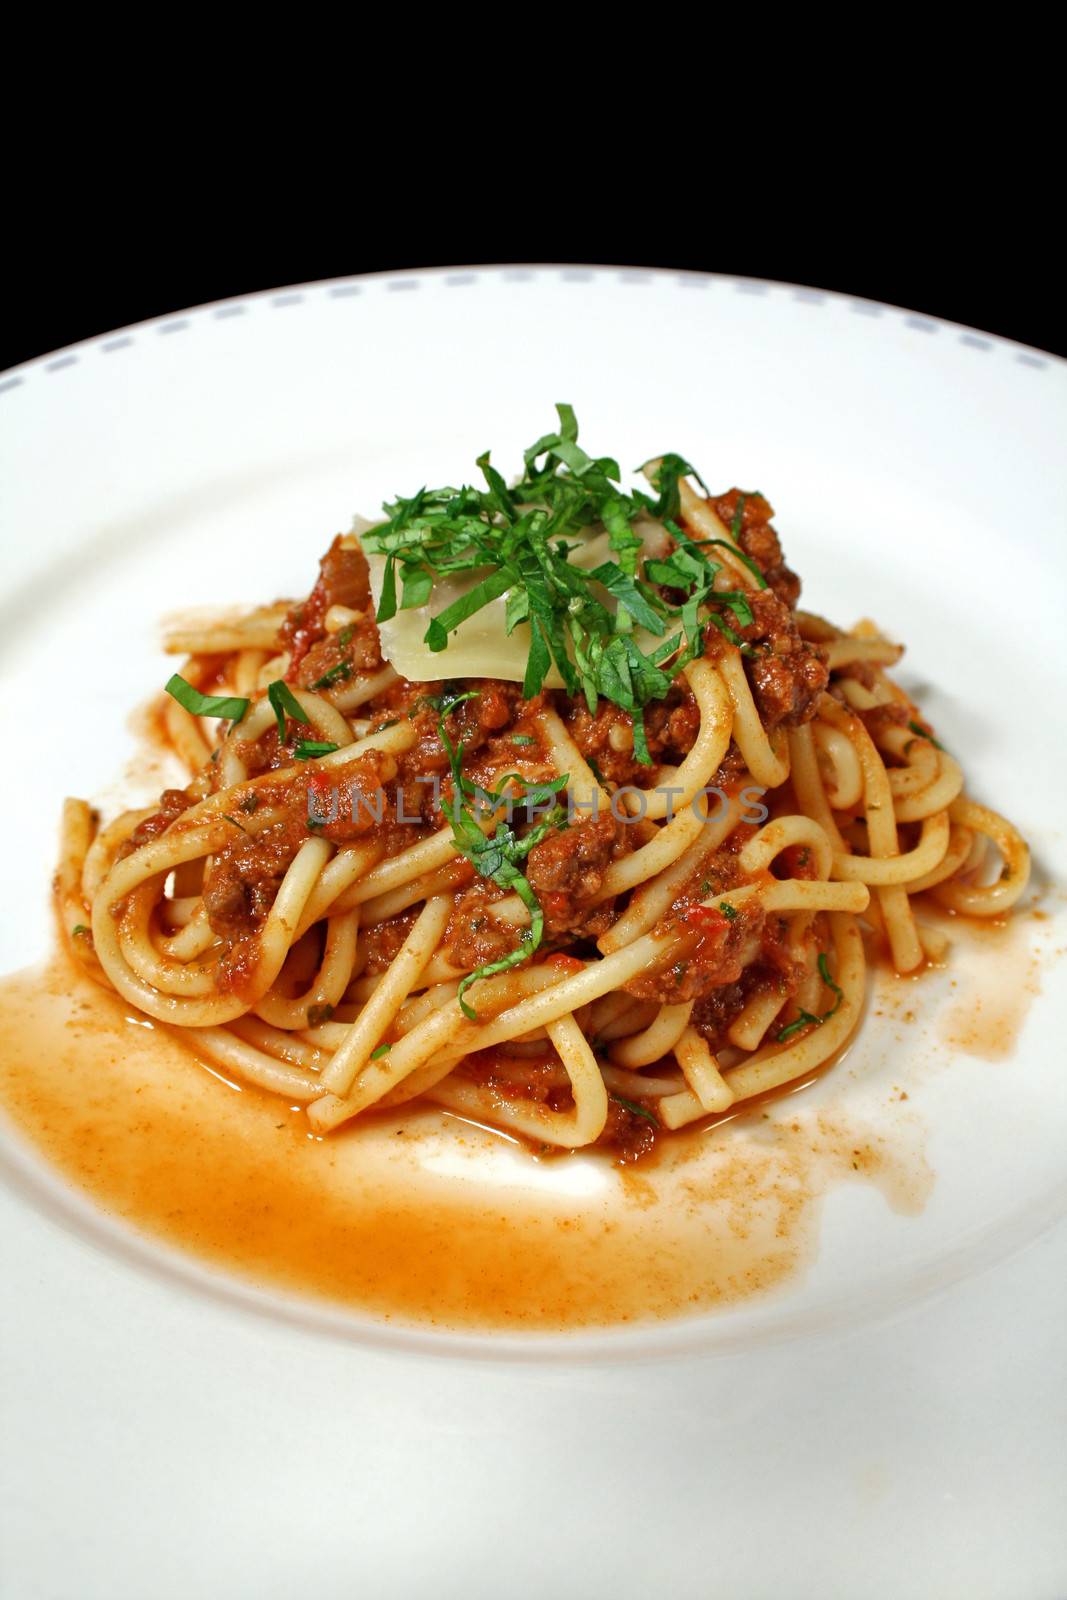 Delicious bolognese sauce and spaghetti mixed together.